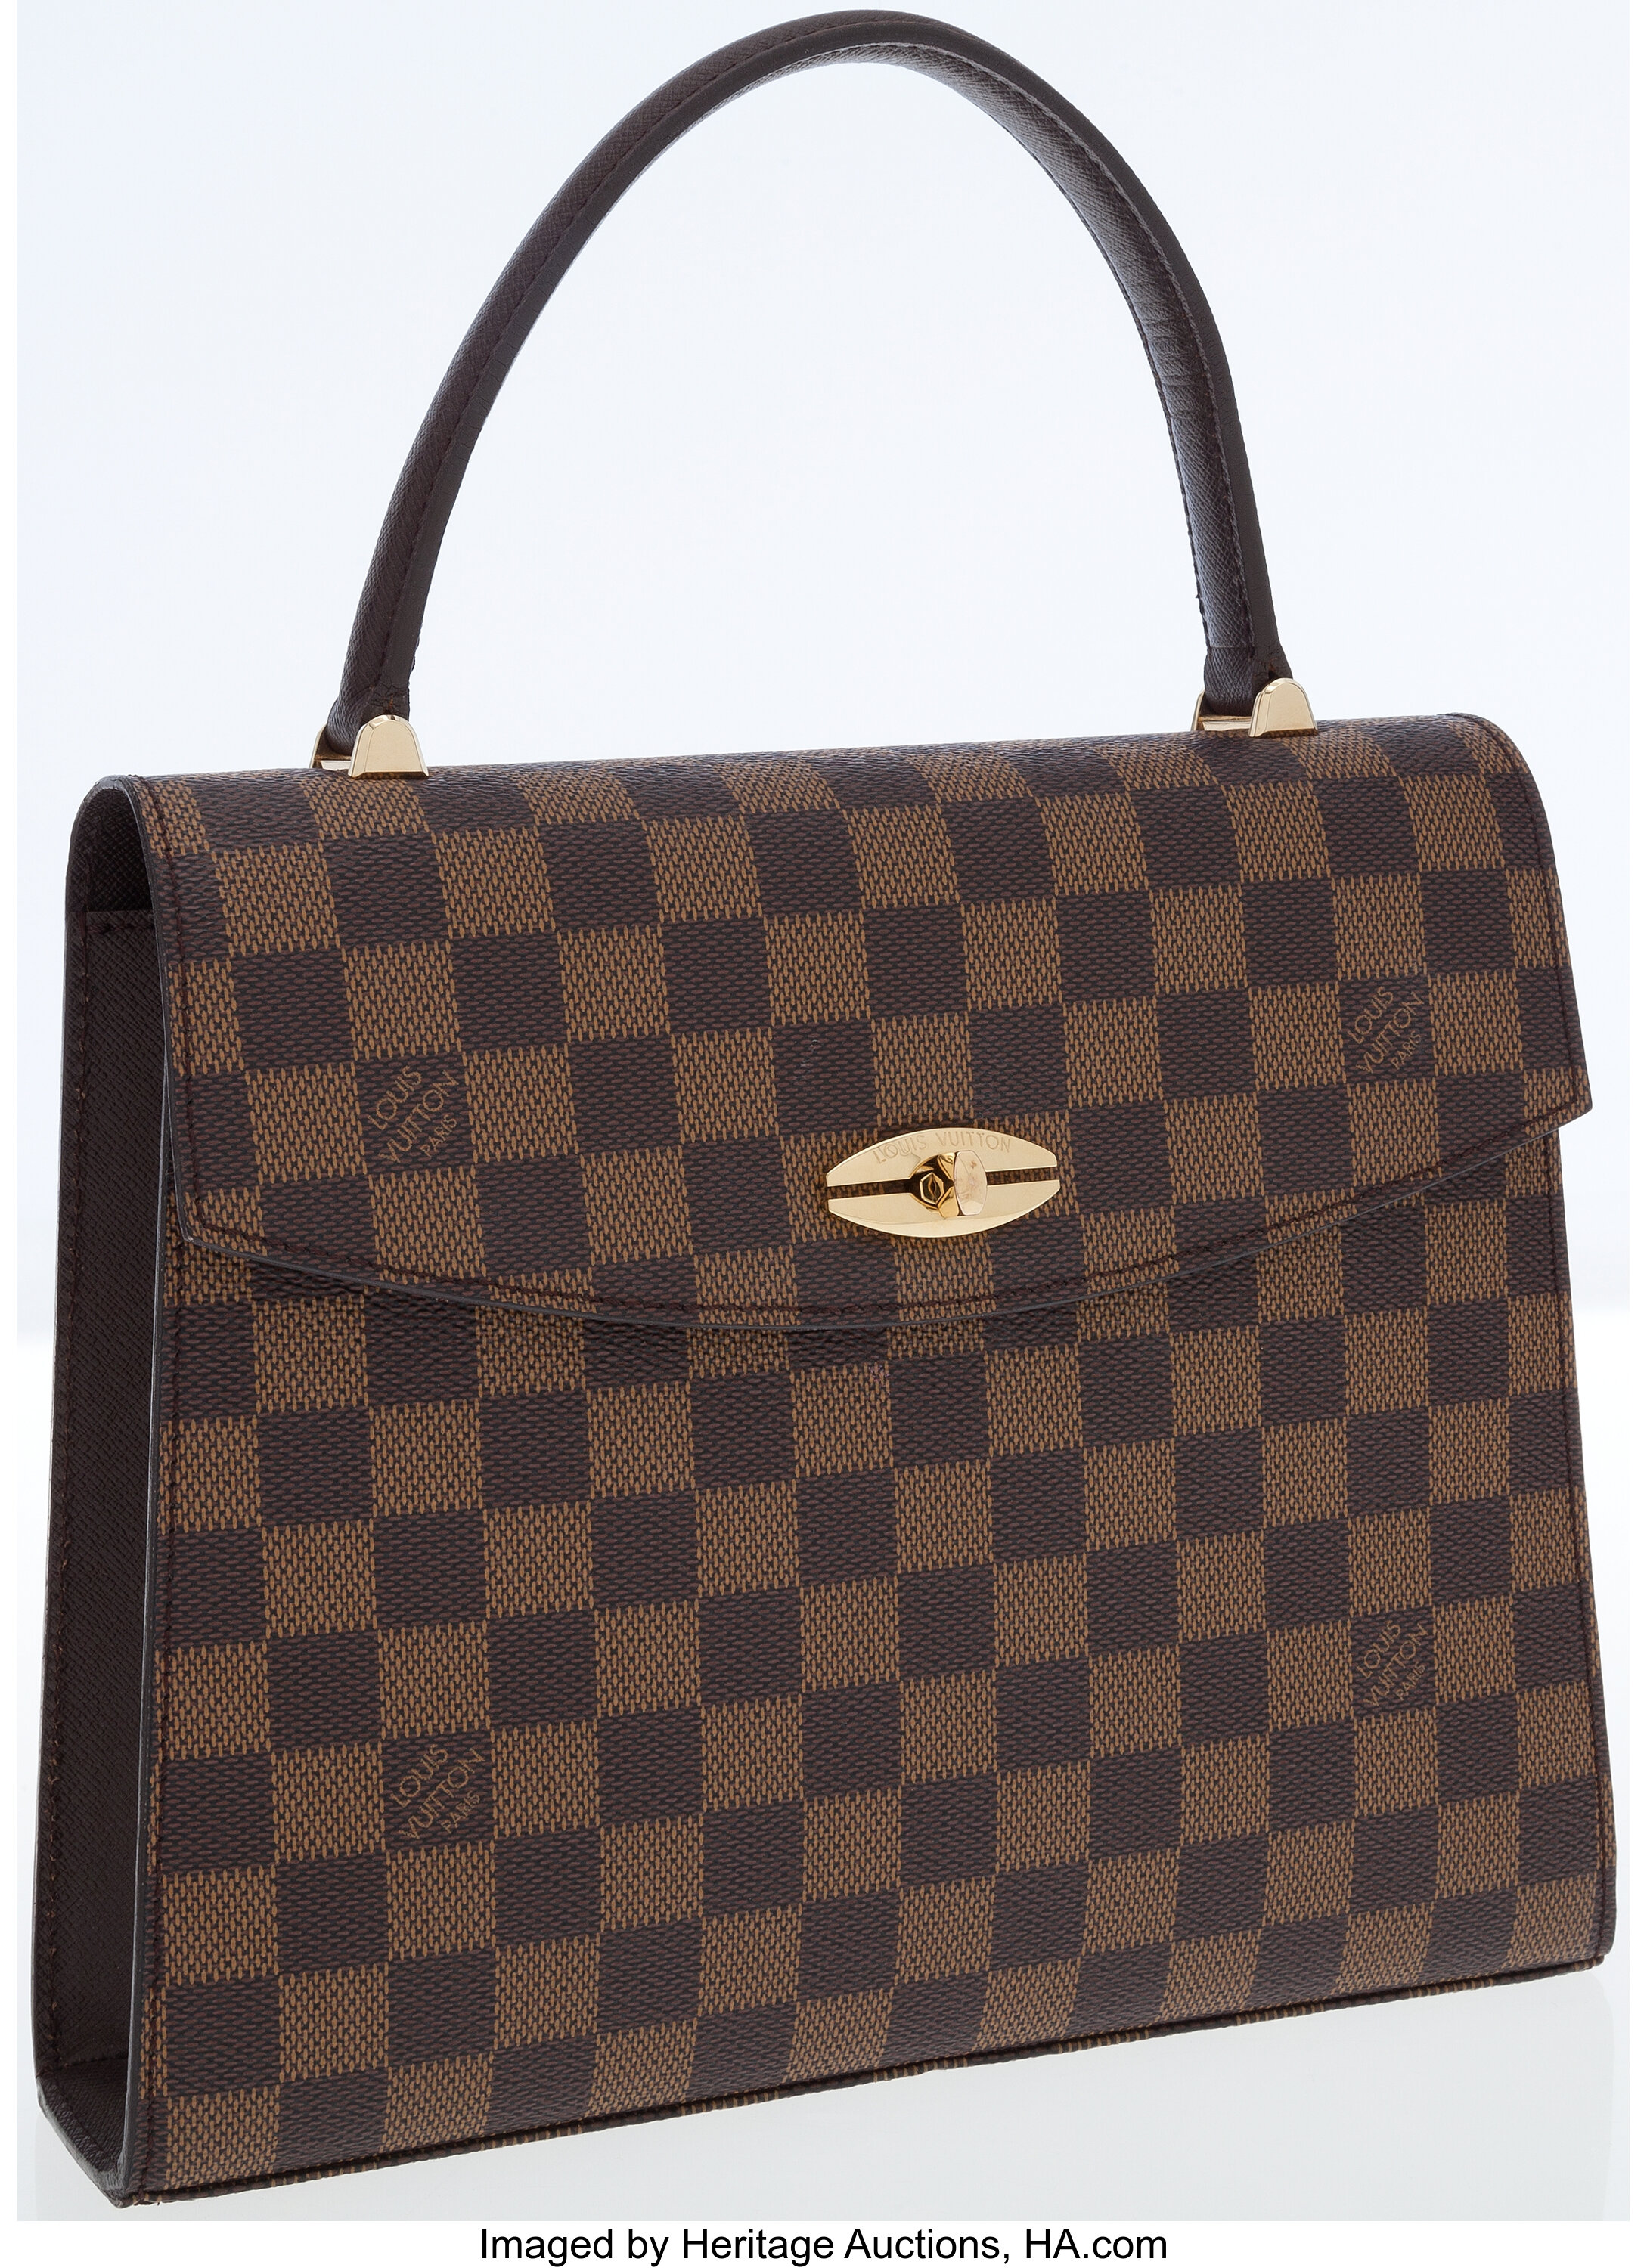 A Louis Vuitton Monogram Canvas Travel Pouch, 9 x 2.5. sold at auction on  26th October